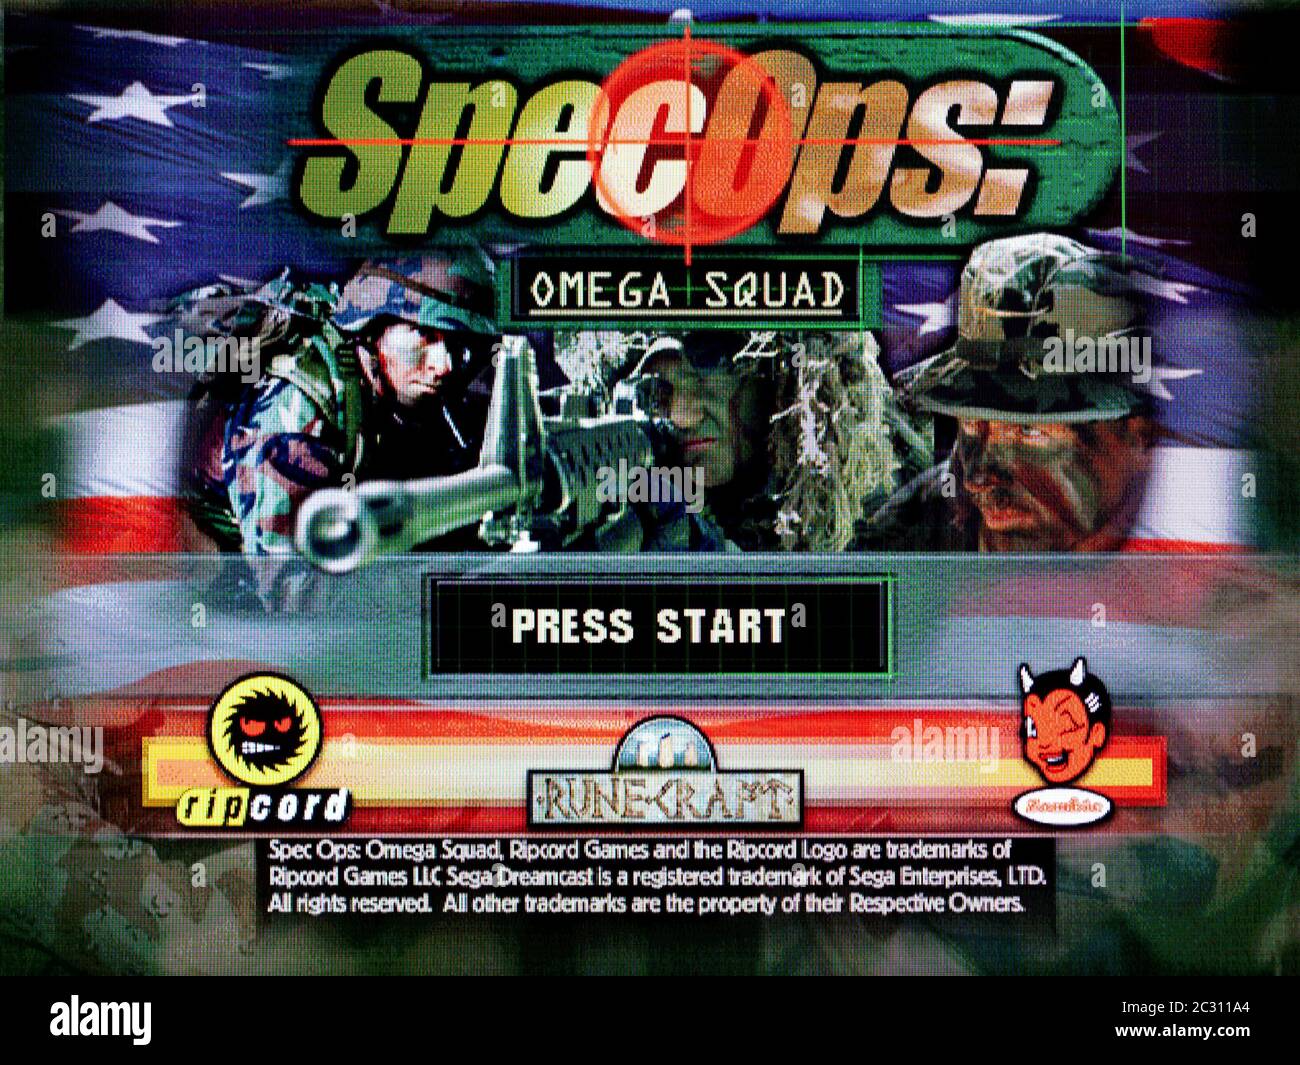 Spec Ops Omega Squad - Sega Dreamcast Videogame - Editorial use only Stock Photo